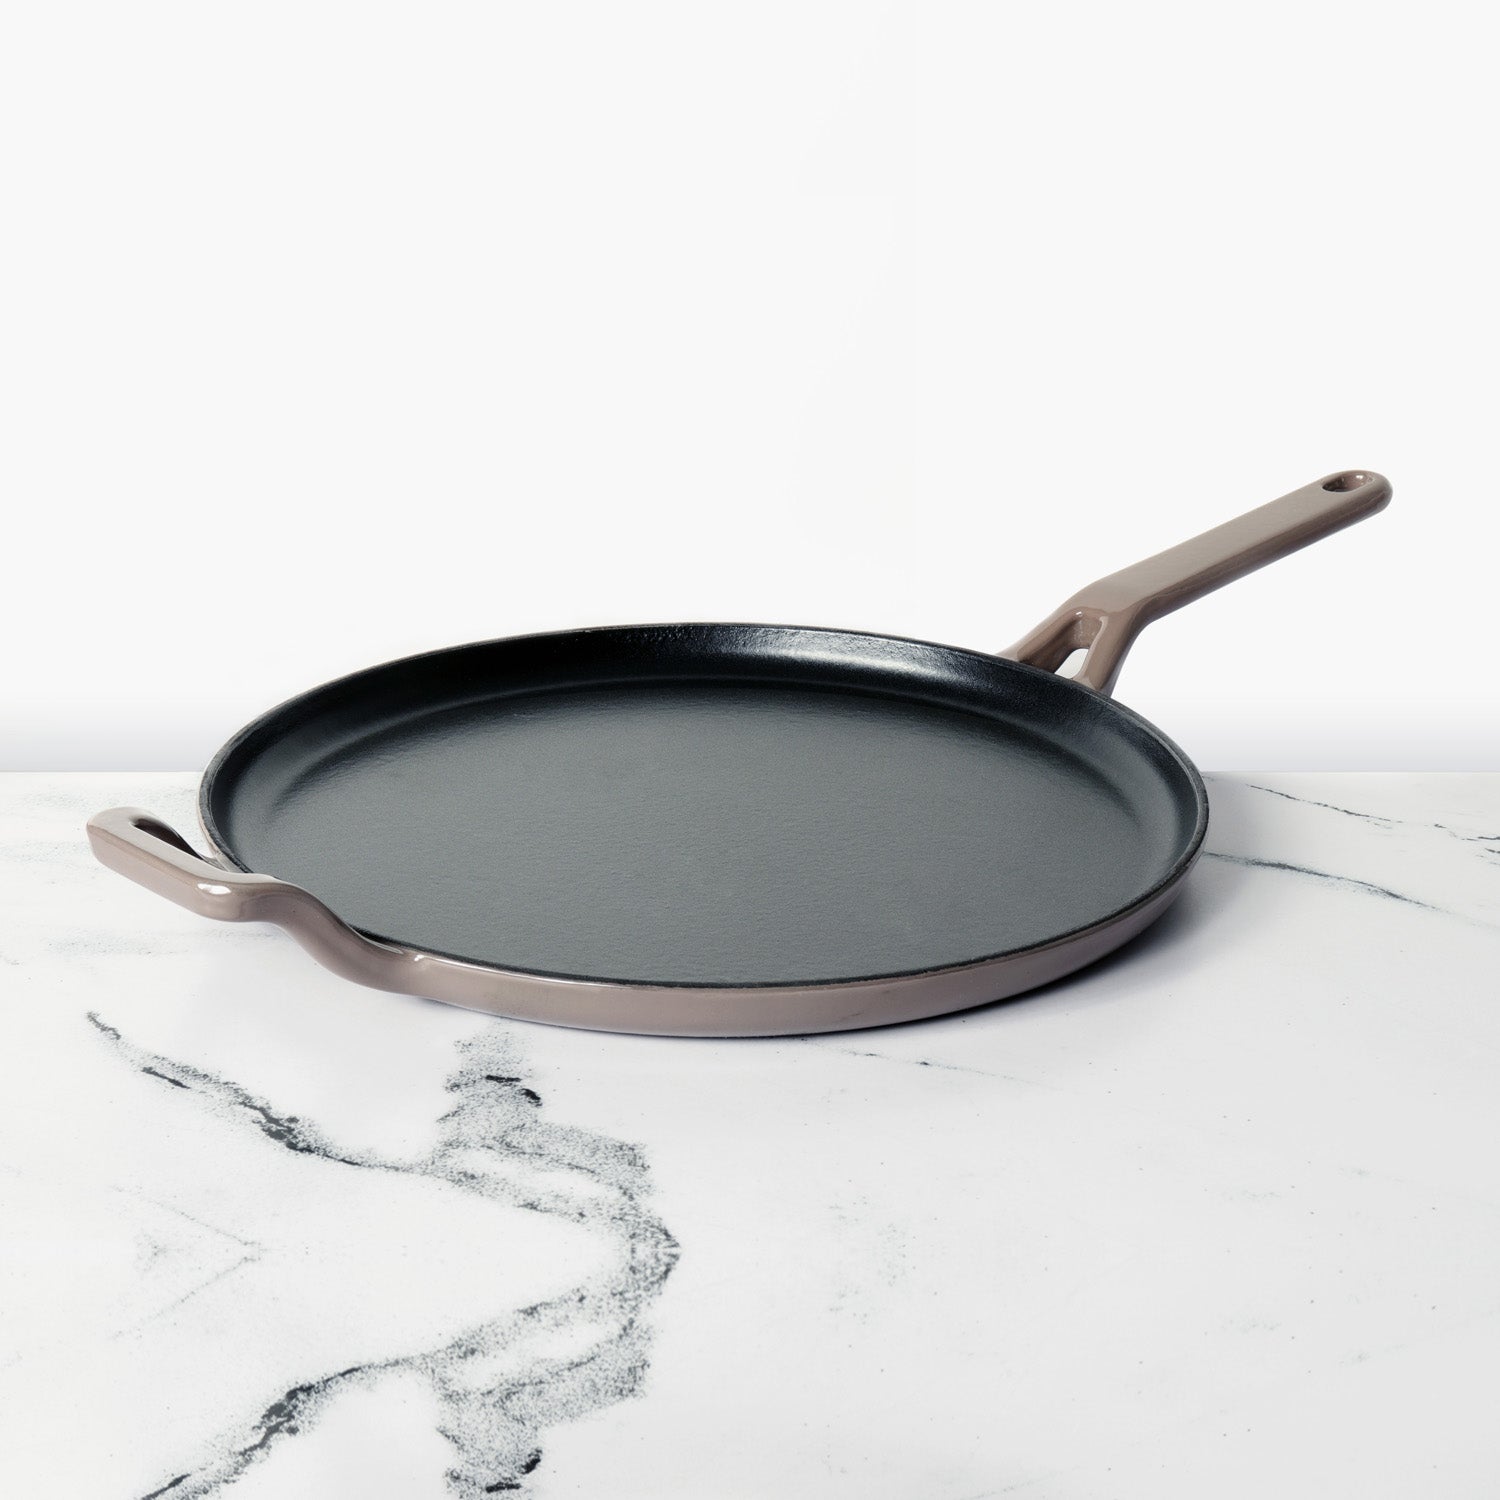 Best Cast Iron Tawa Pans For Your Home - PotsandPans India